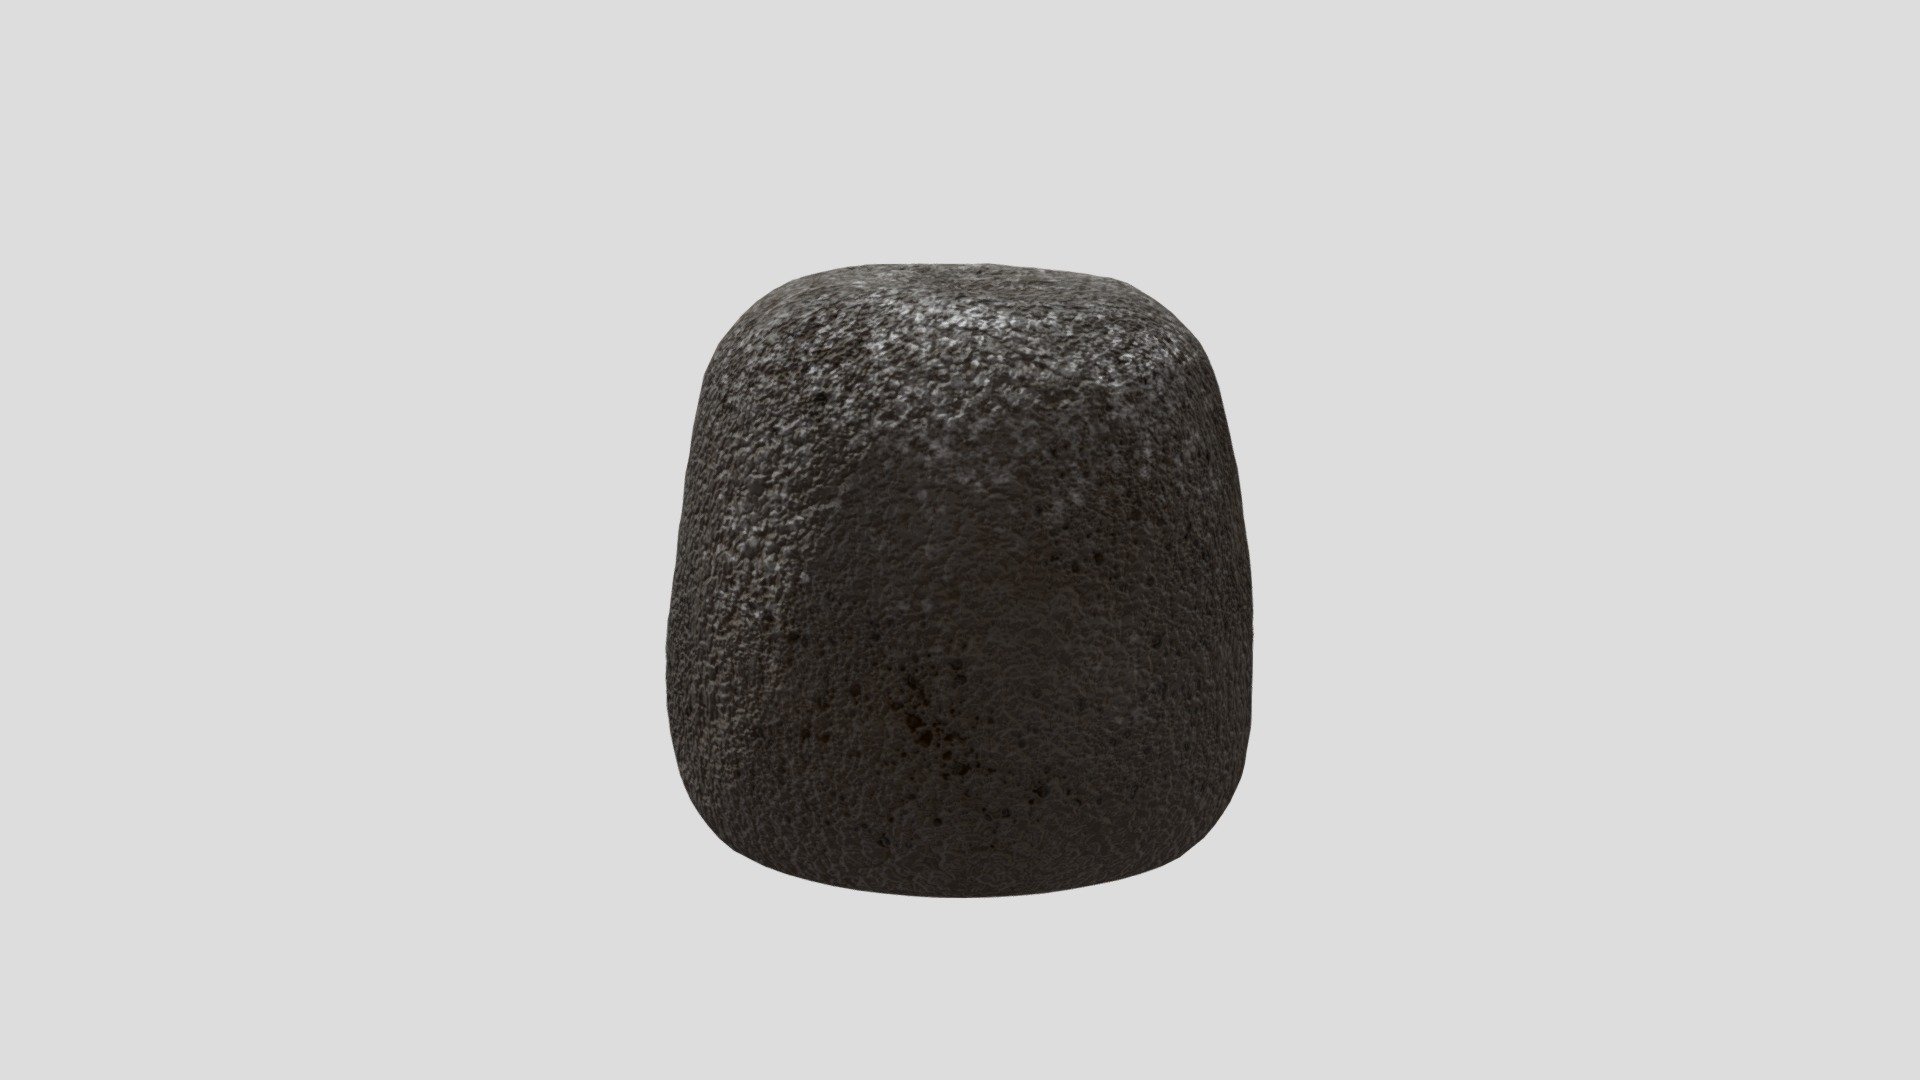 This is my version of a lava cake.

I made the basic model in Autodesk Maya then used Zbrush to further details. For textures I used Substance Painter 3d model